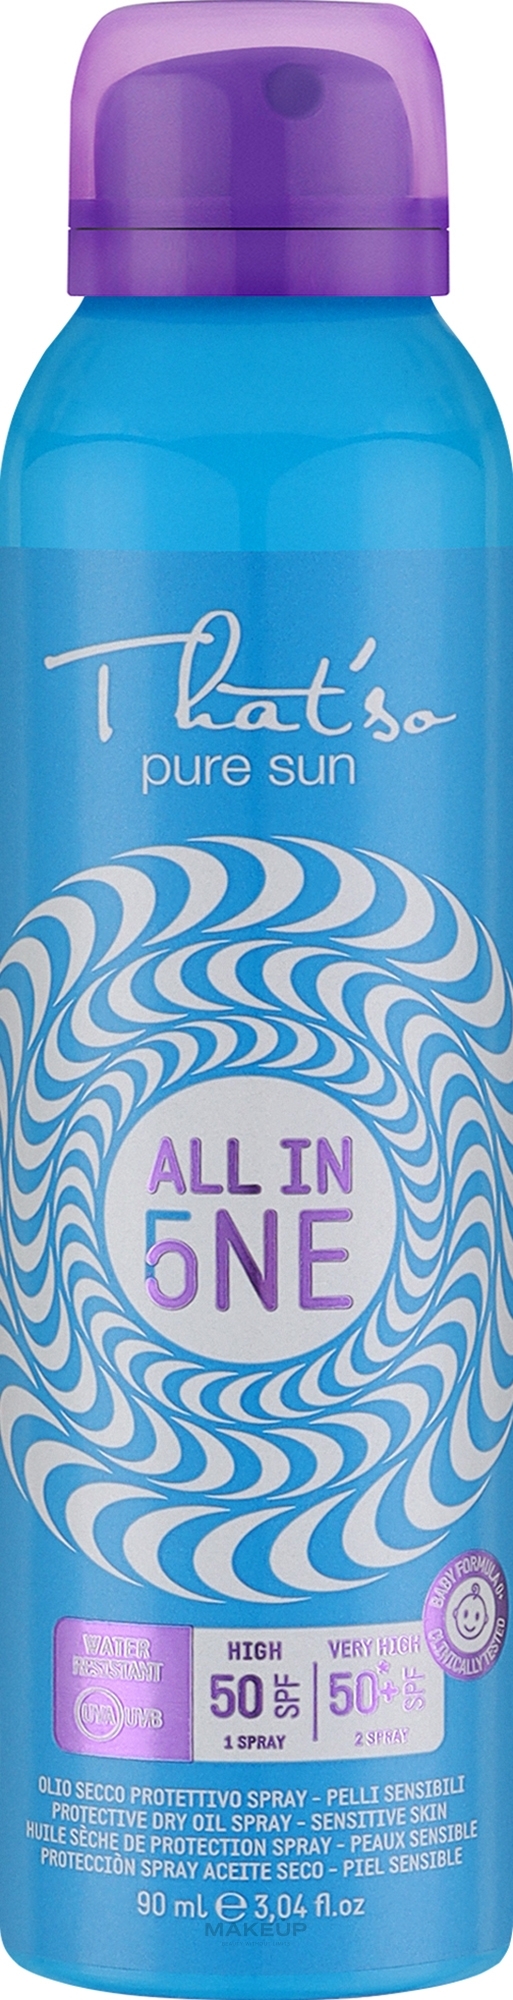 Baby Sun Spray for Sensitive Skin - That’So All in One After Sun SPF50 — photo 90 ml